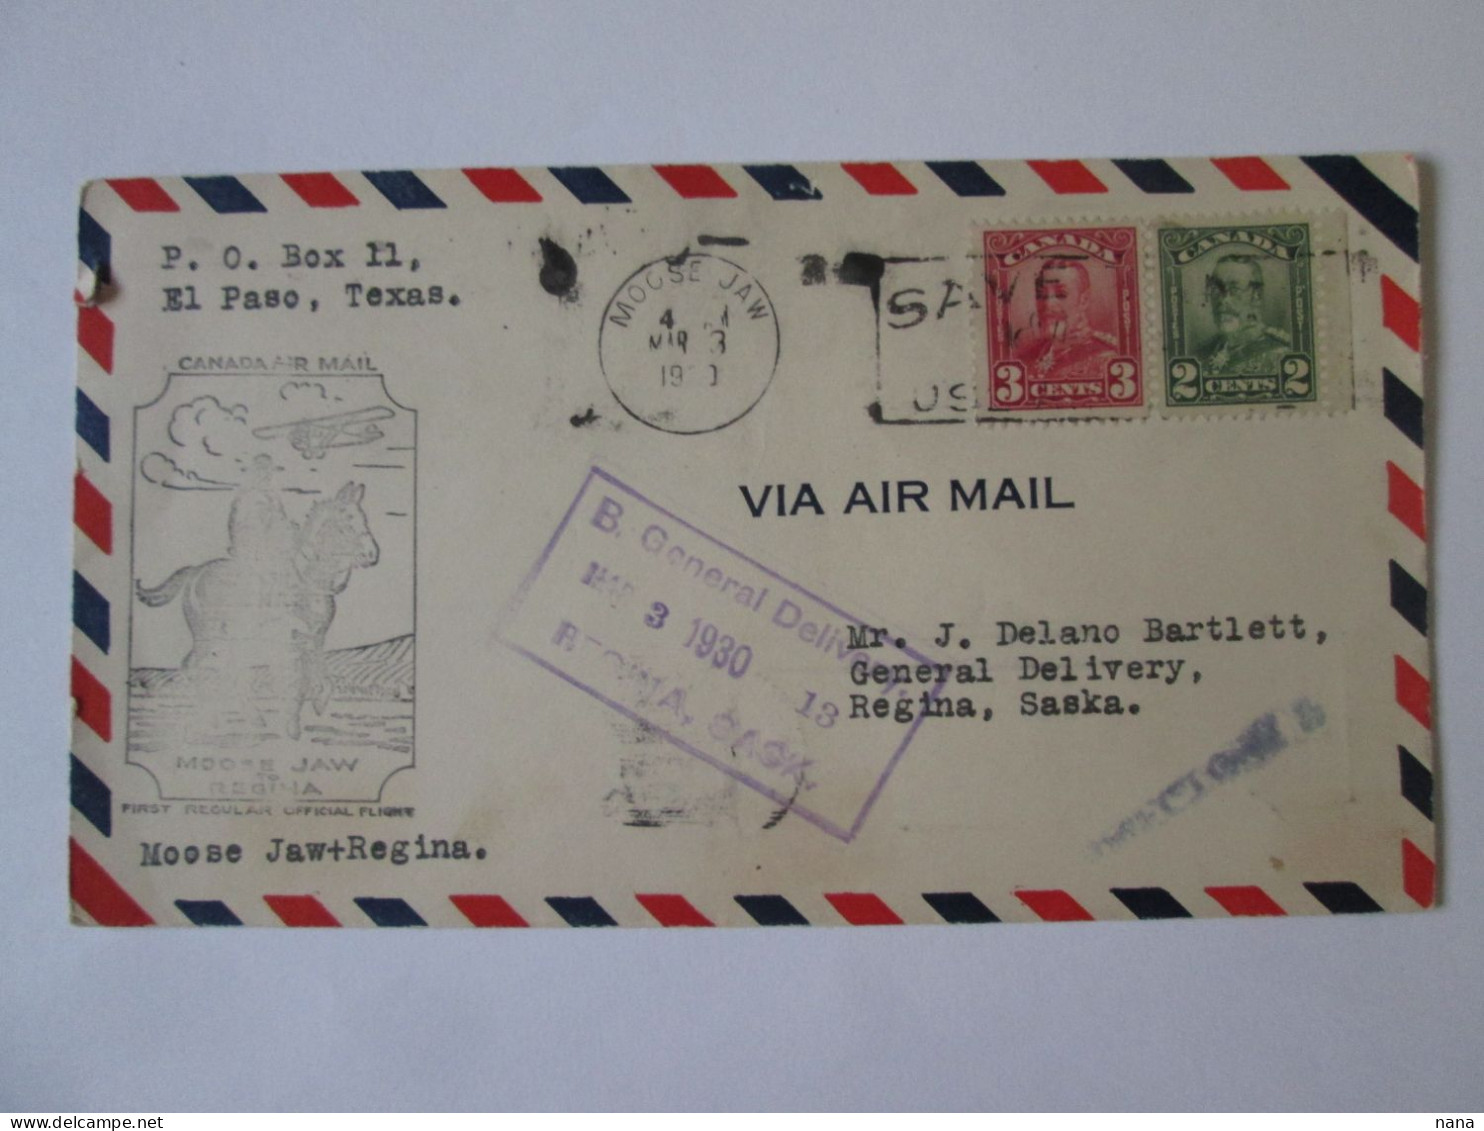 Canada/Moose Jaw-Regina Premier Vol Officielle Enveloppe 1930/Official First Flight Cover 1930 - First Flight Covers